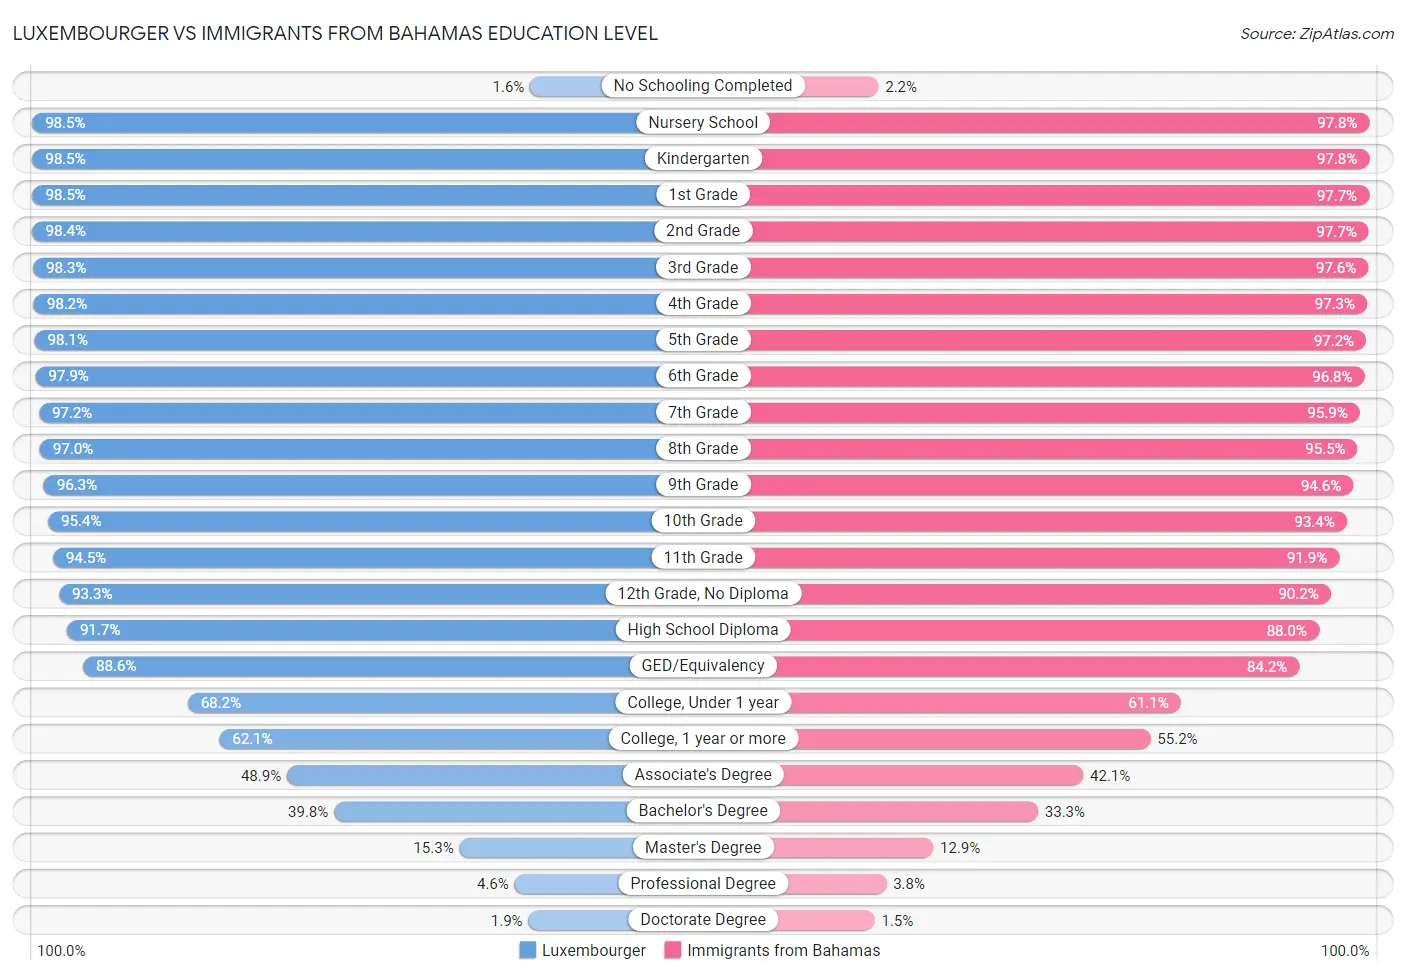 Luxembourger vs Immigrants from Bahamas Education Level